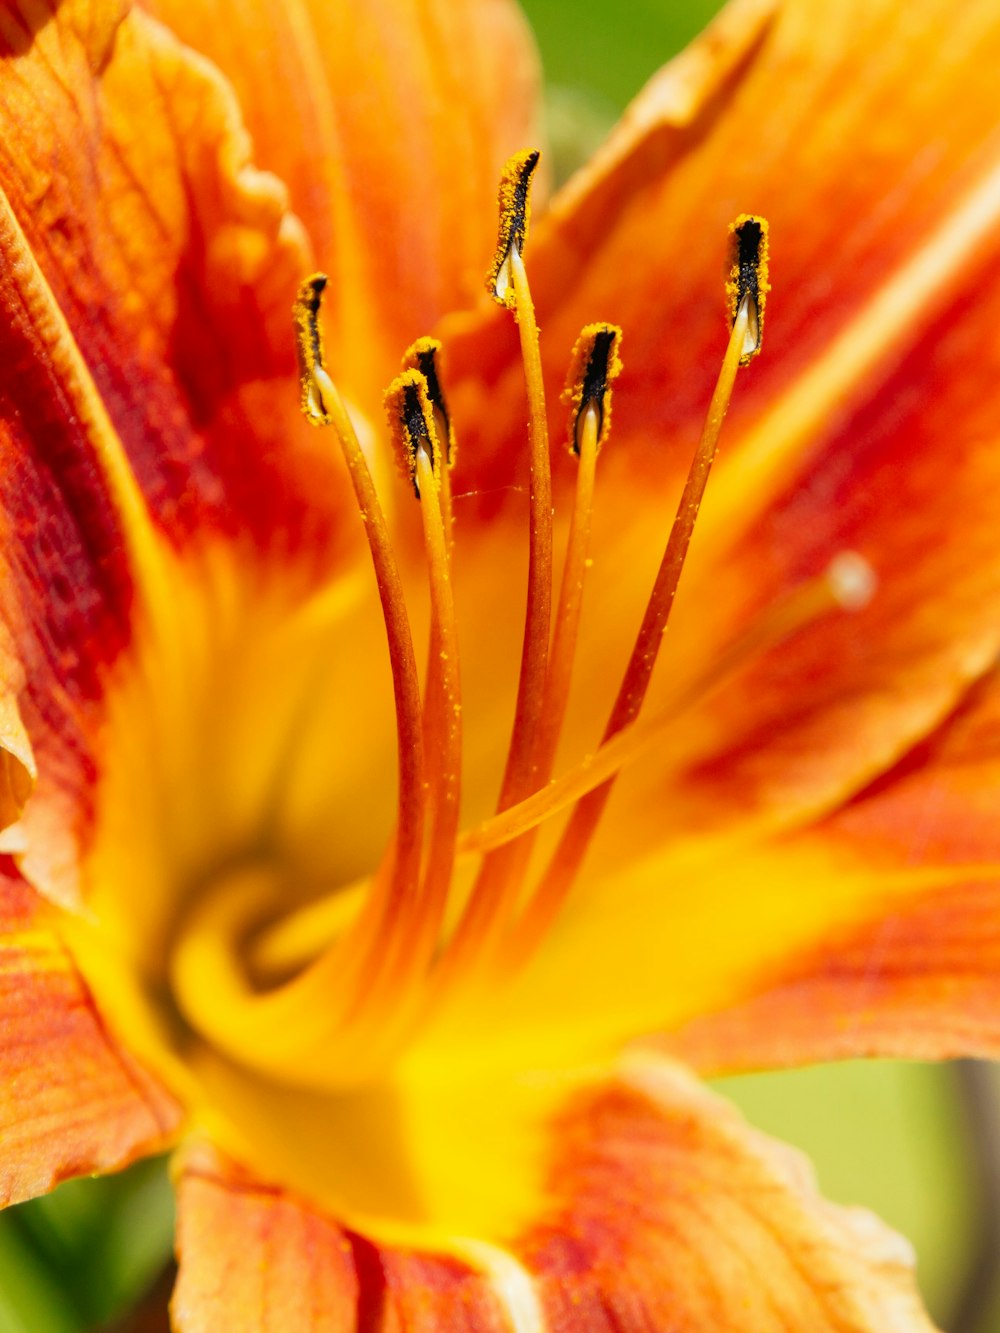 a close up of a yellow and red flower